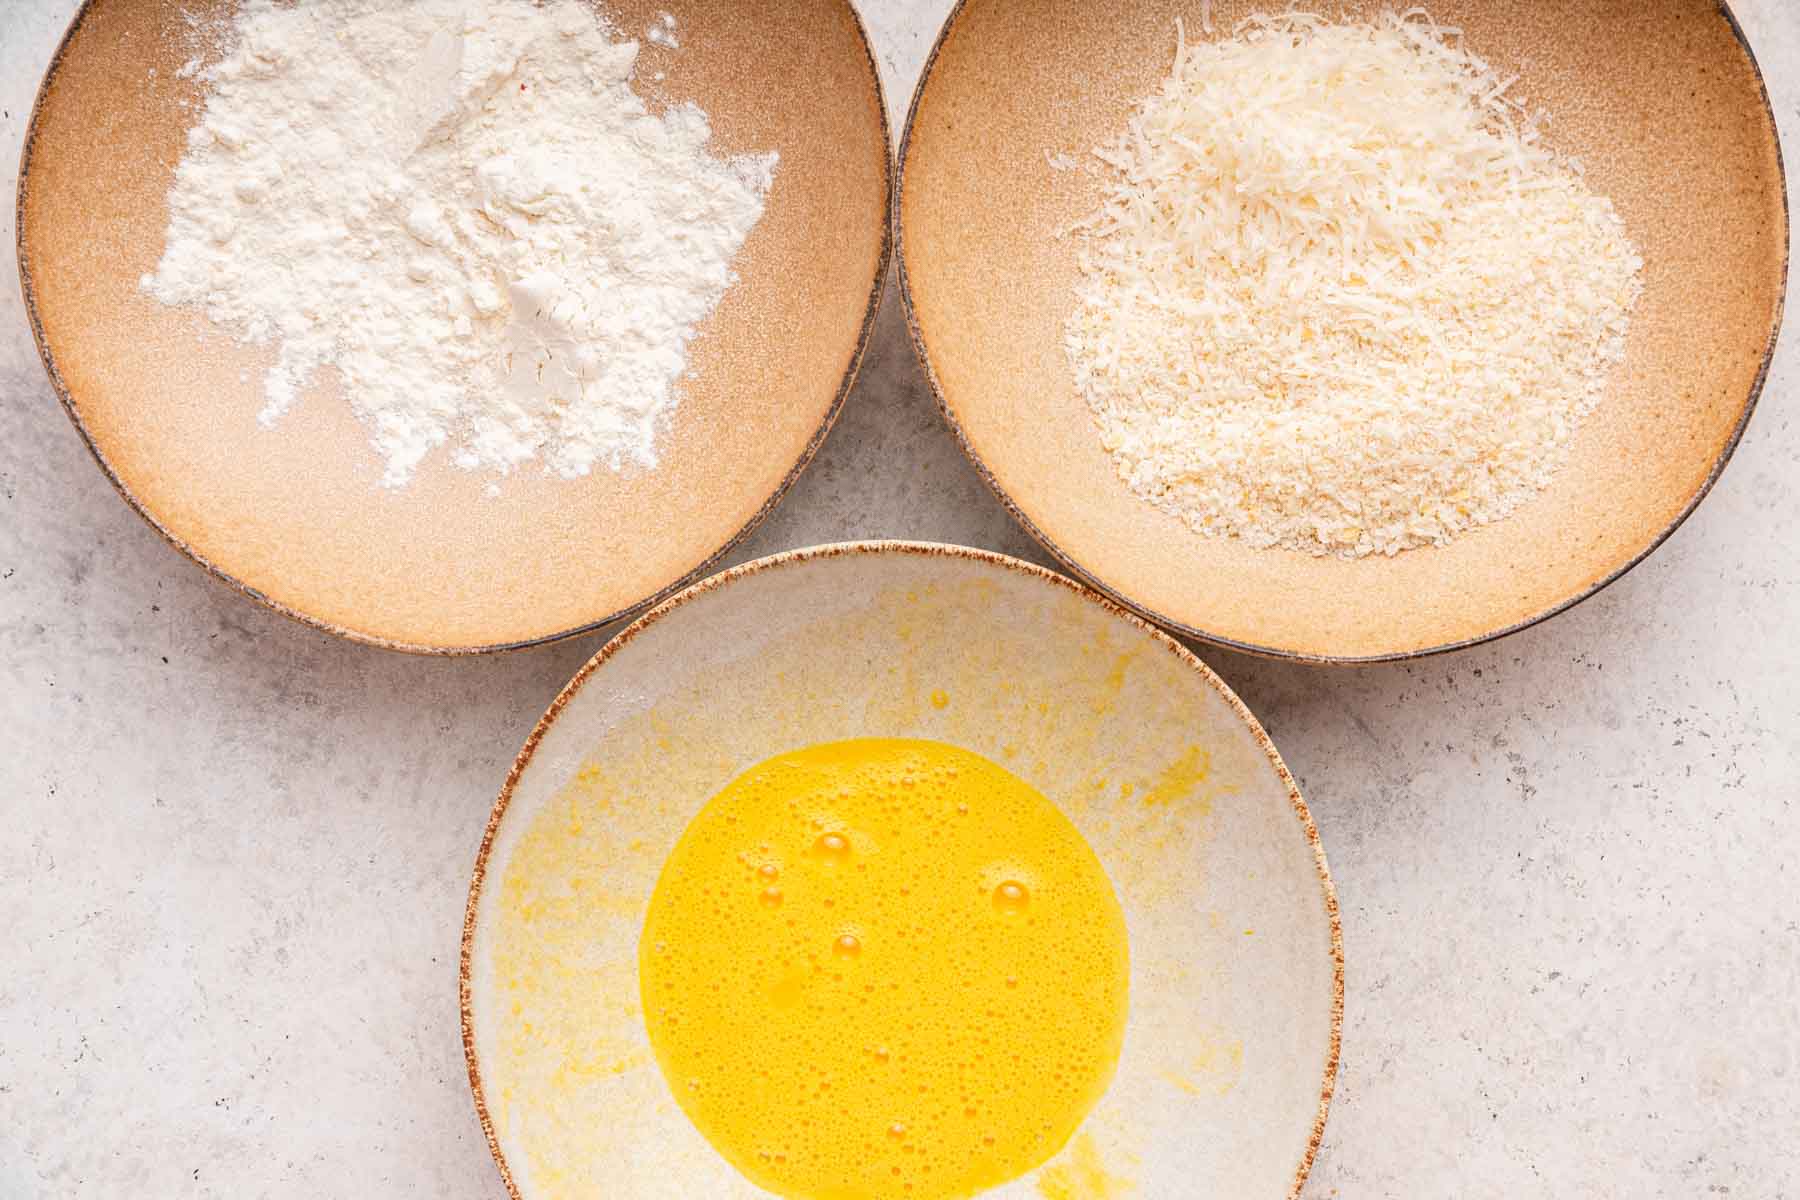 Three bowls with flour, egg and breadcrumbs in each one.